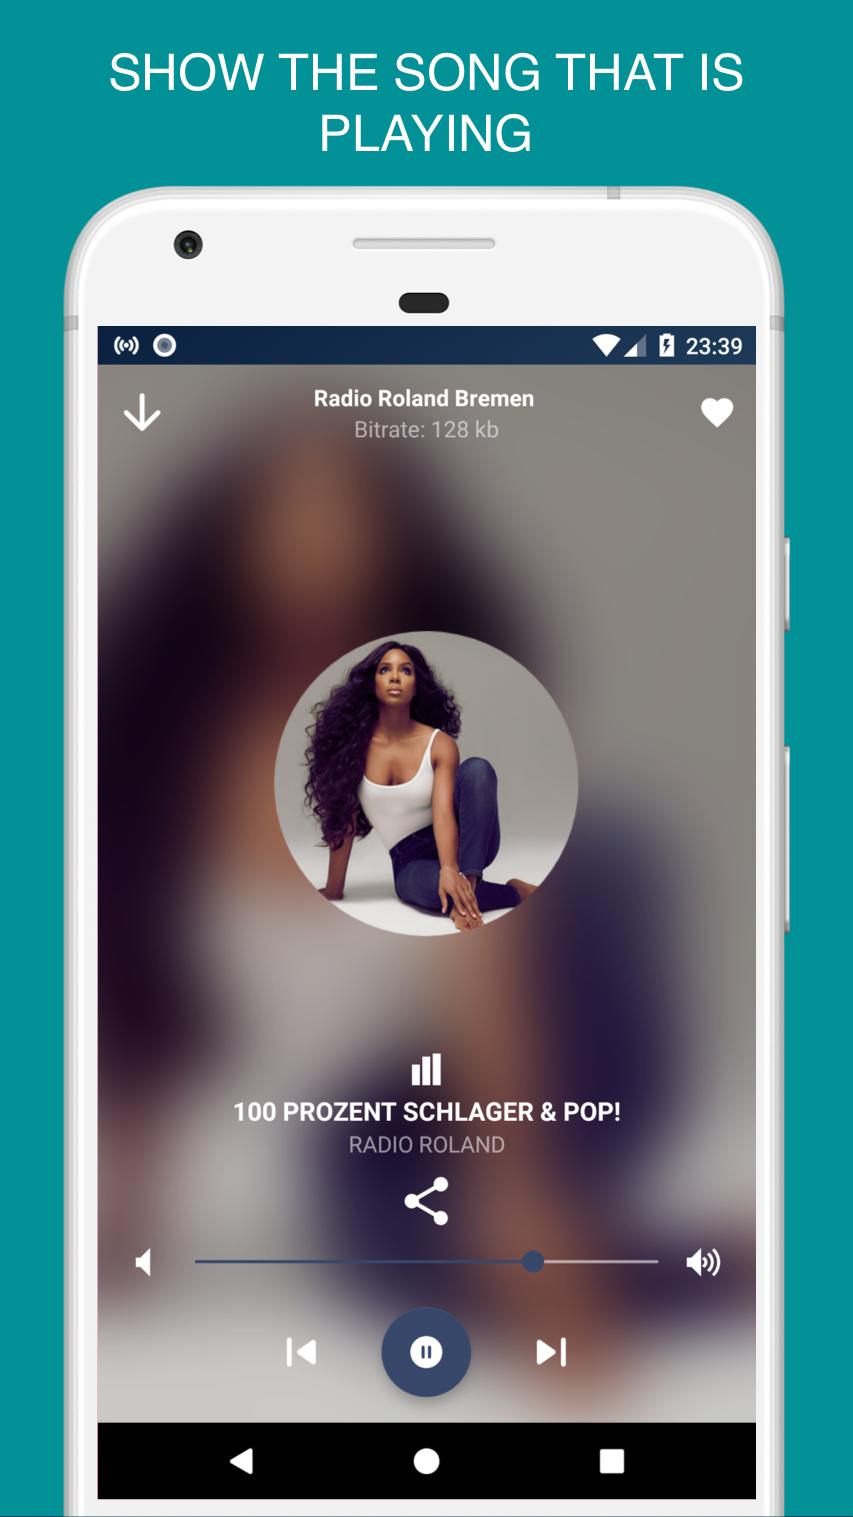 Radio Roland Bremen App Free Live for Android - APK Download